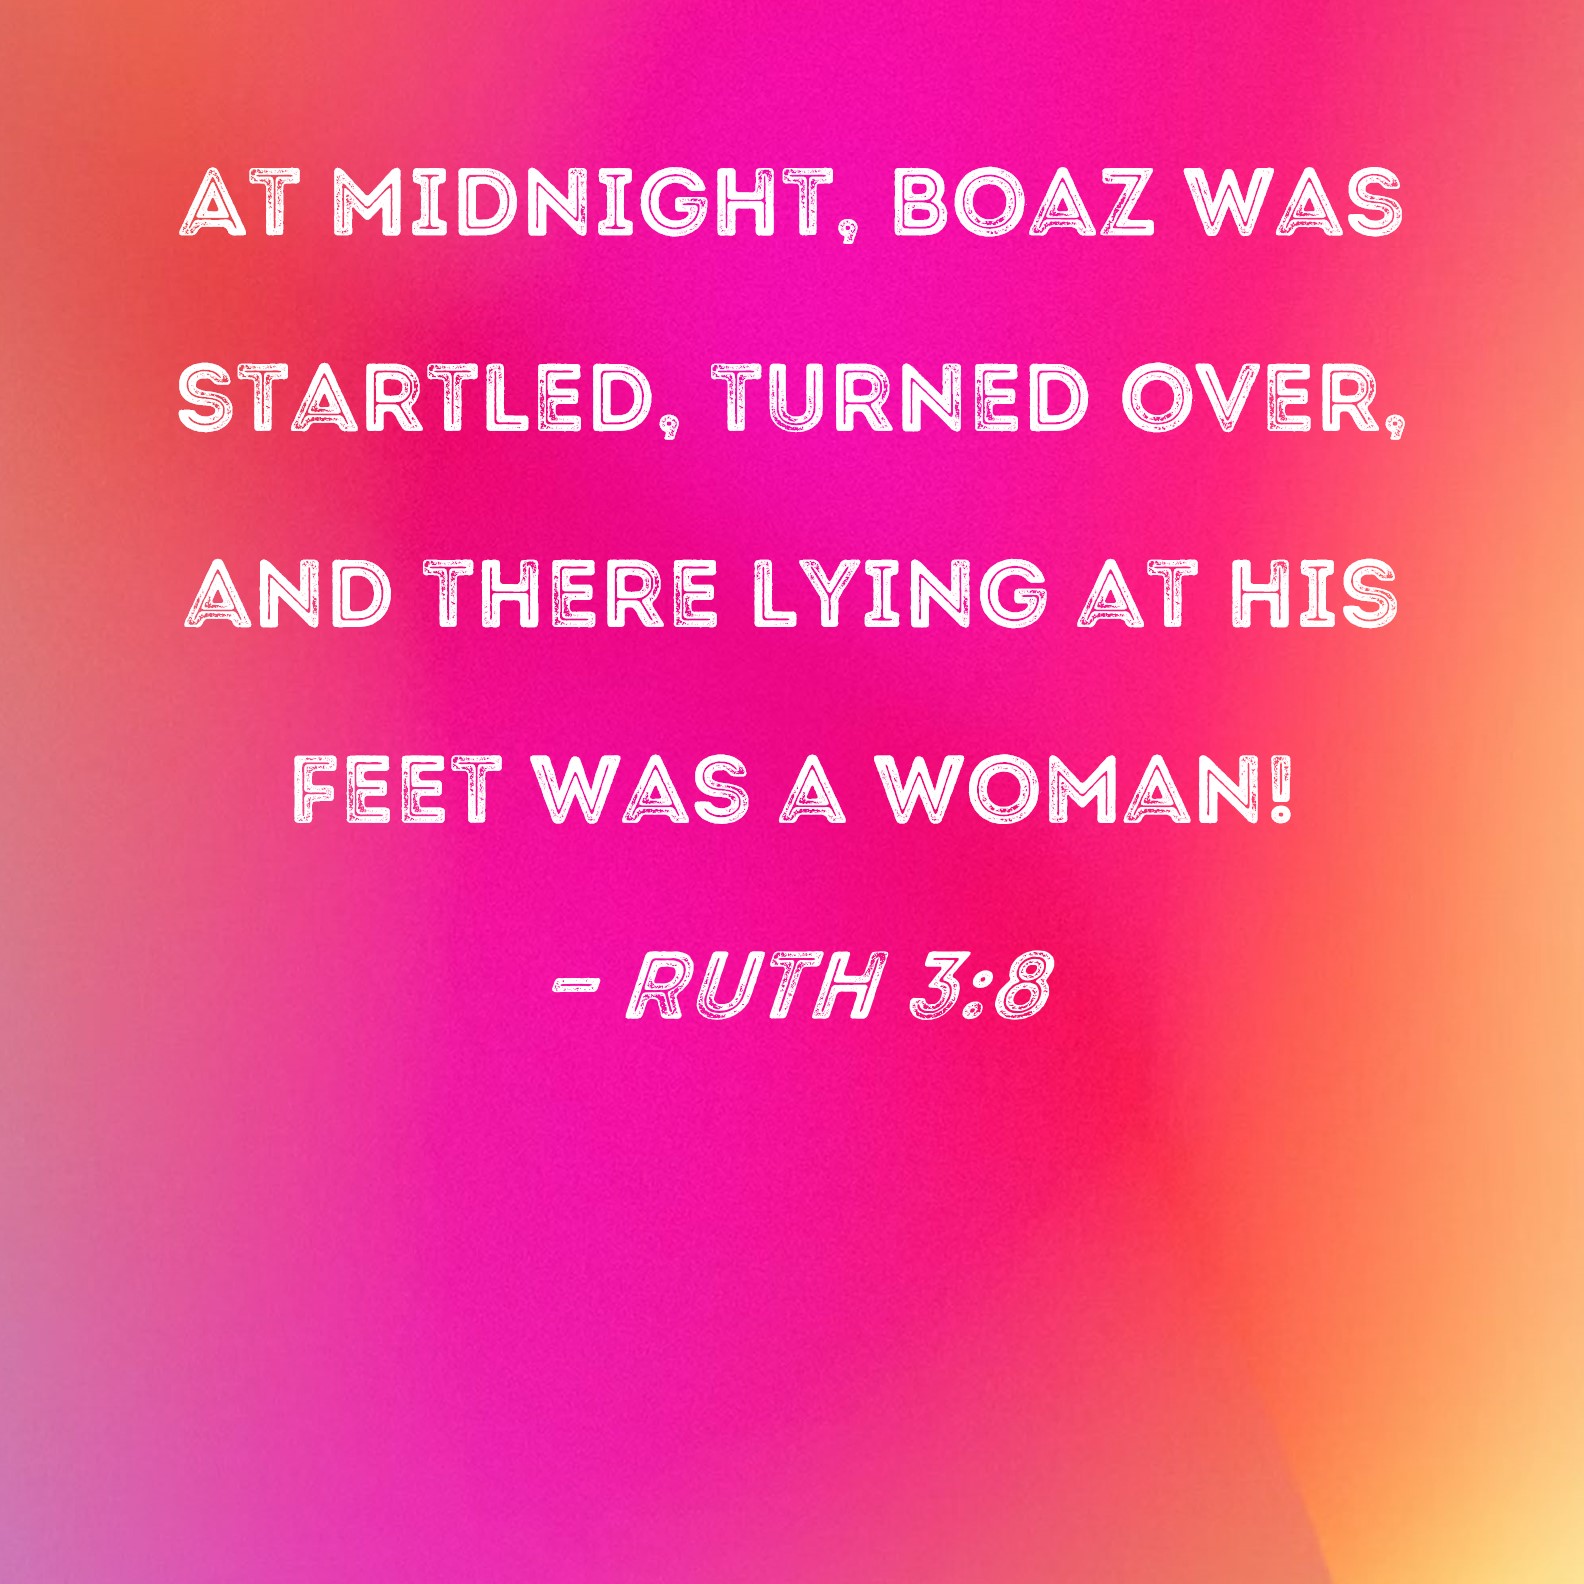 ruth in the bible quotes